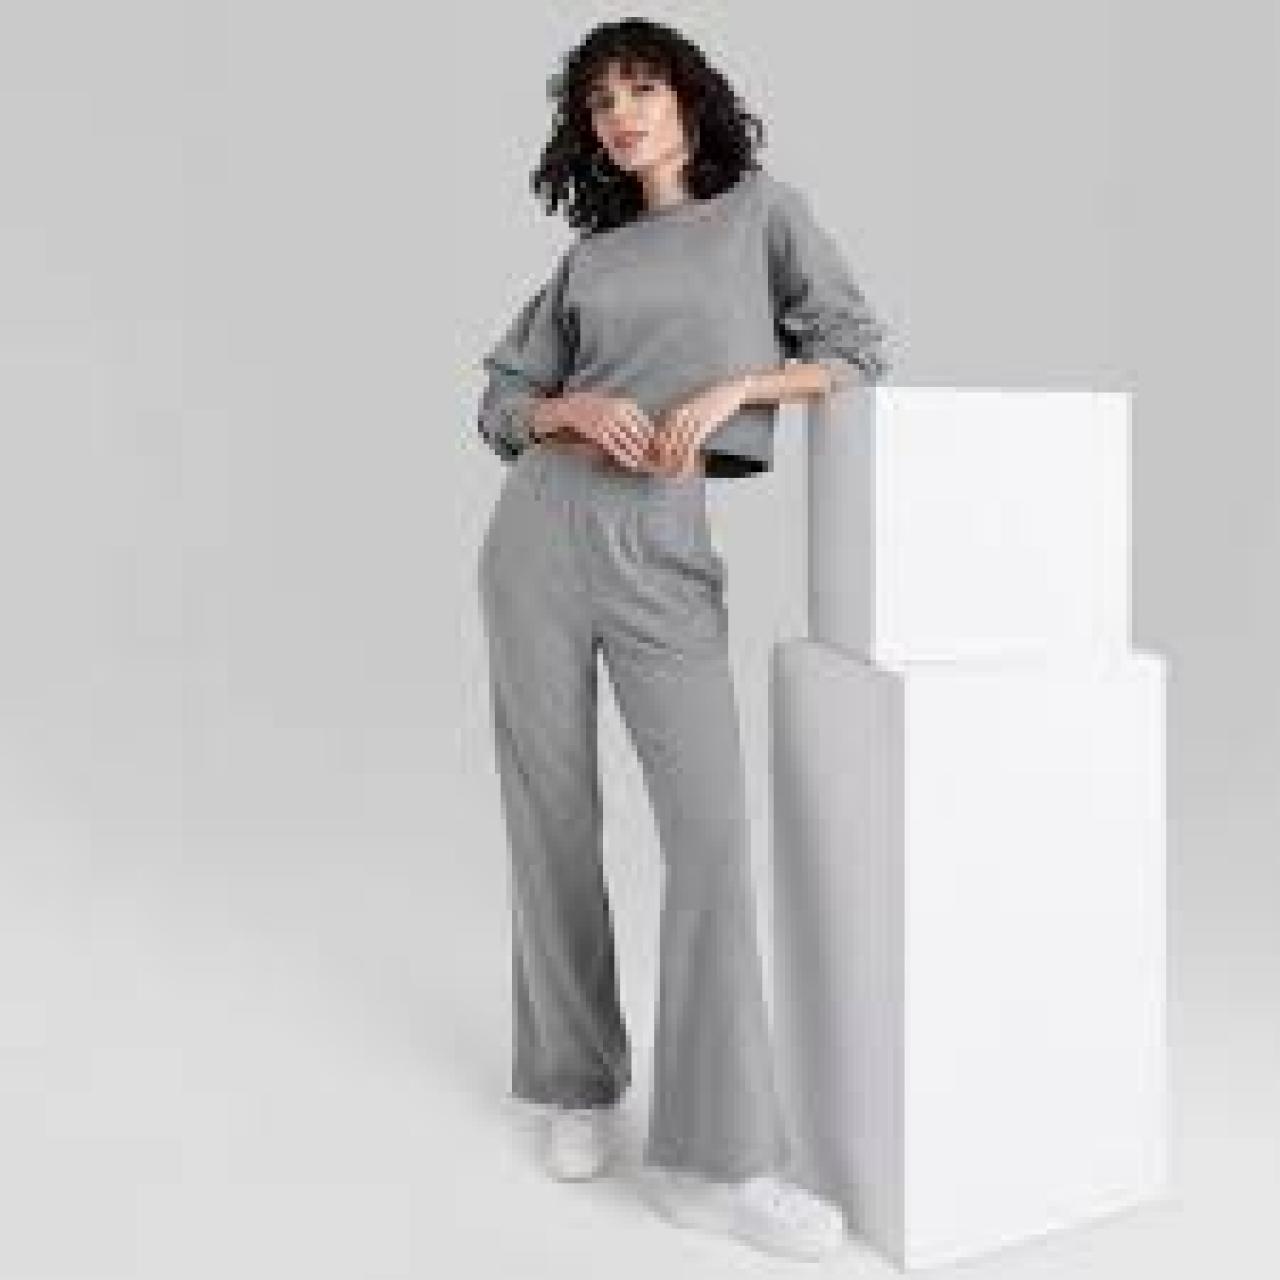 Women's High-Rise Wide Leg French Terry Sweatpants - Wild Fable